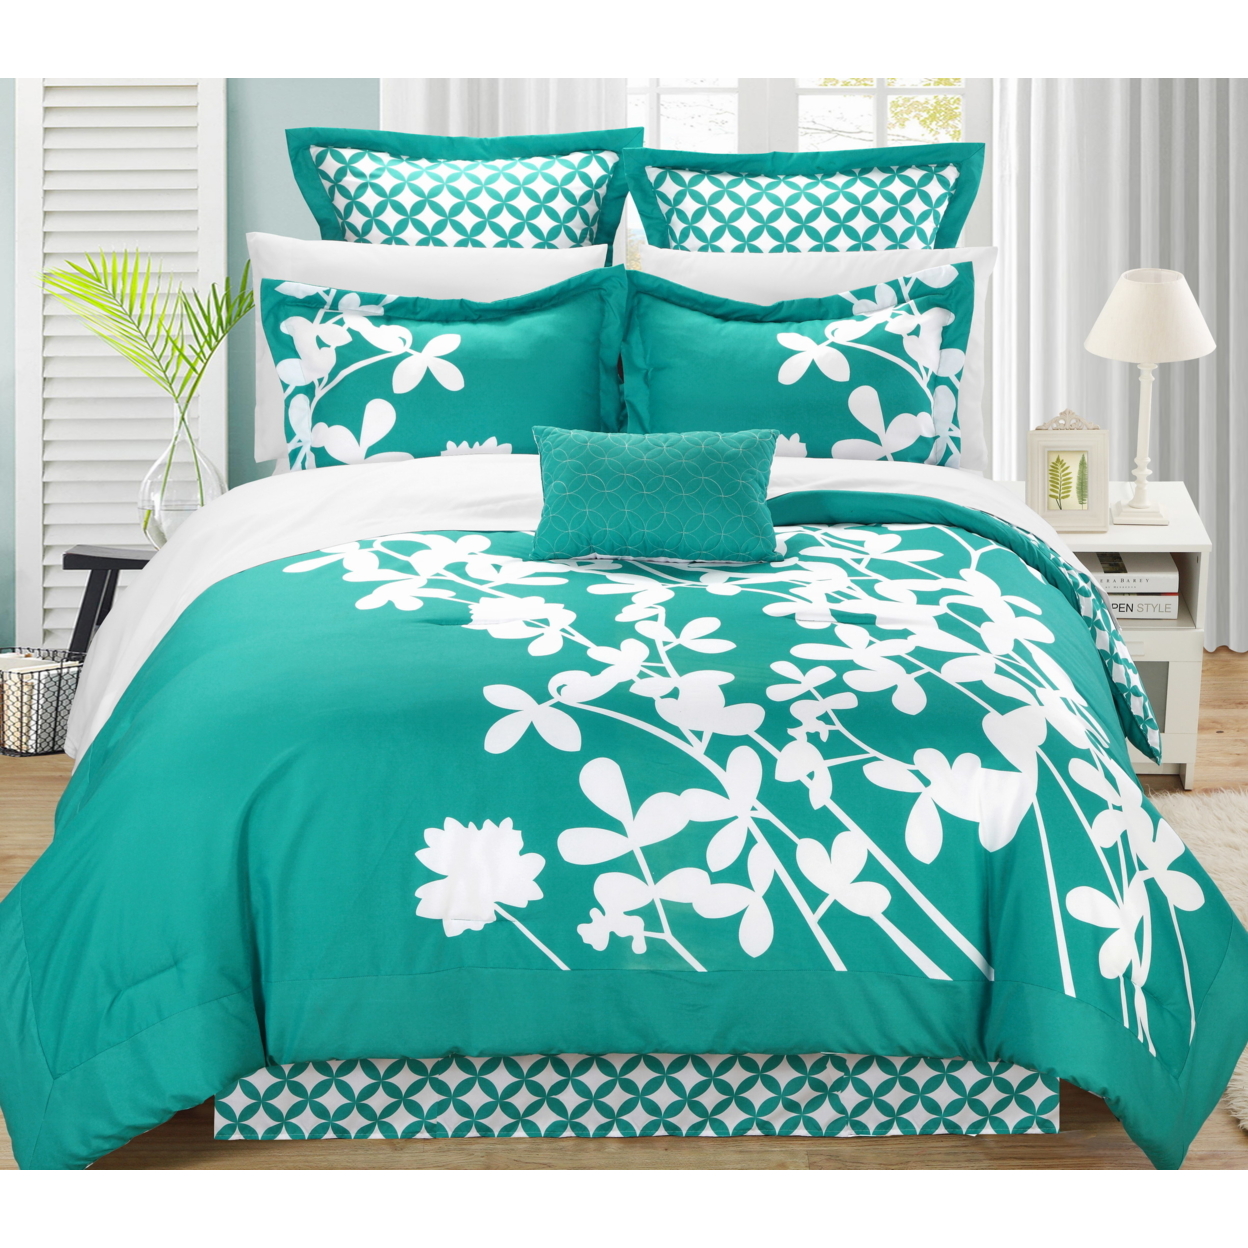 7 Piece Sire Reversible Large Scale Floral Design Printed With Diamond Pattern Reverse Comforter - Turquoise, King